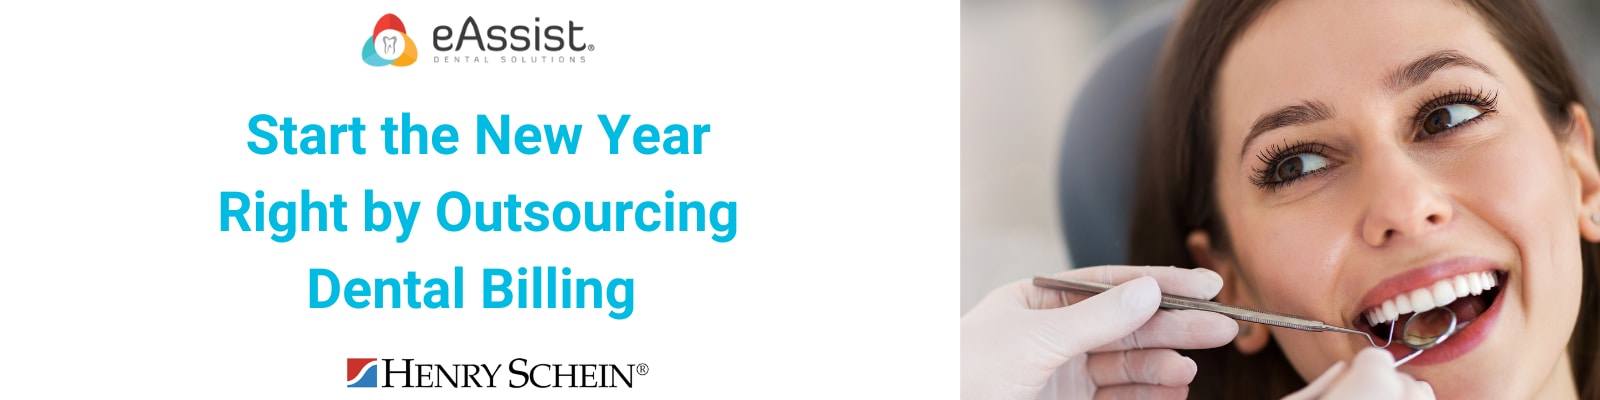 Start the New Year Right by Outsourcing Dental Billing